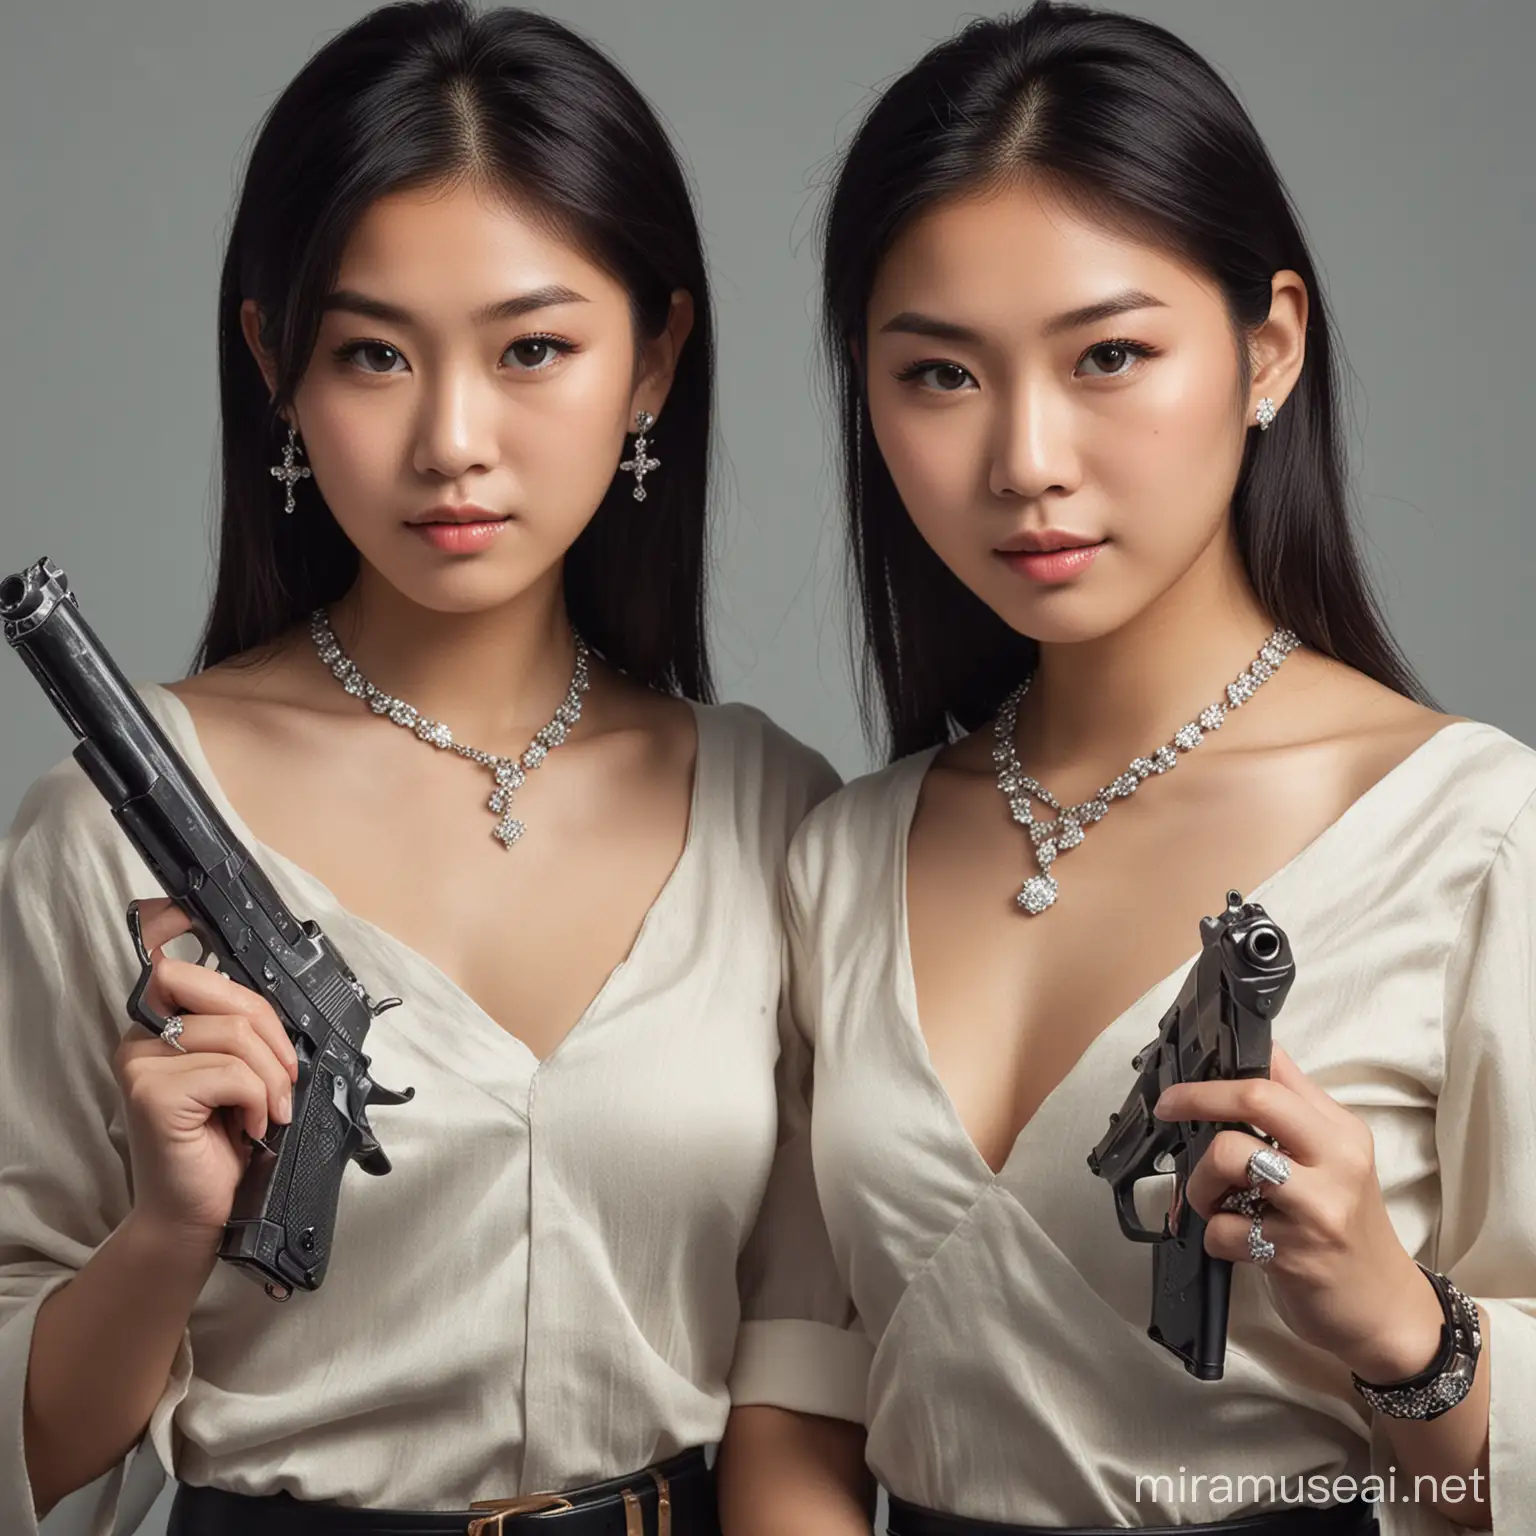 Asian Sisters in Elegance with Firearm Accessories